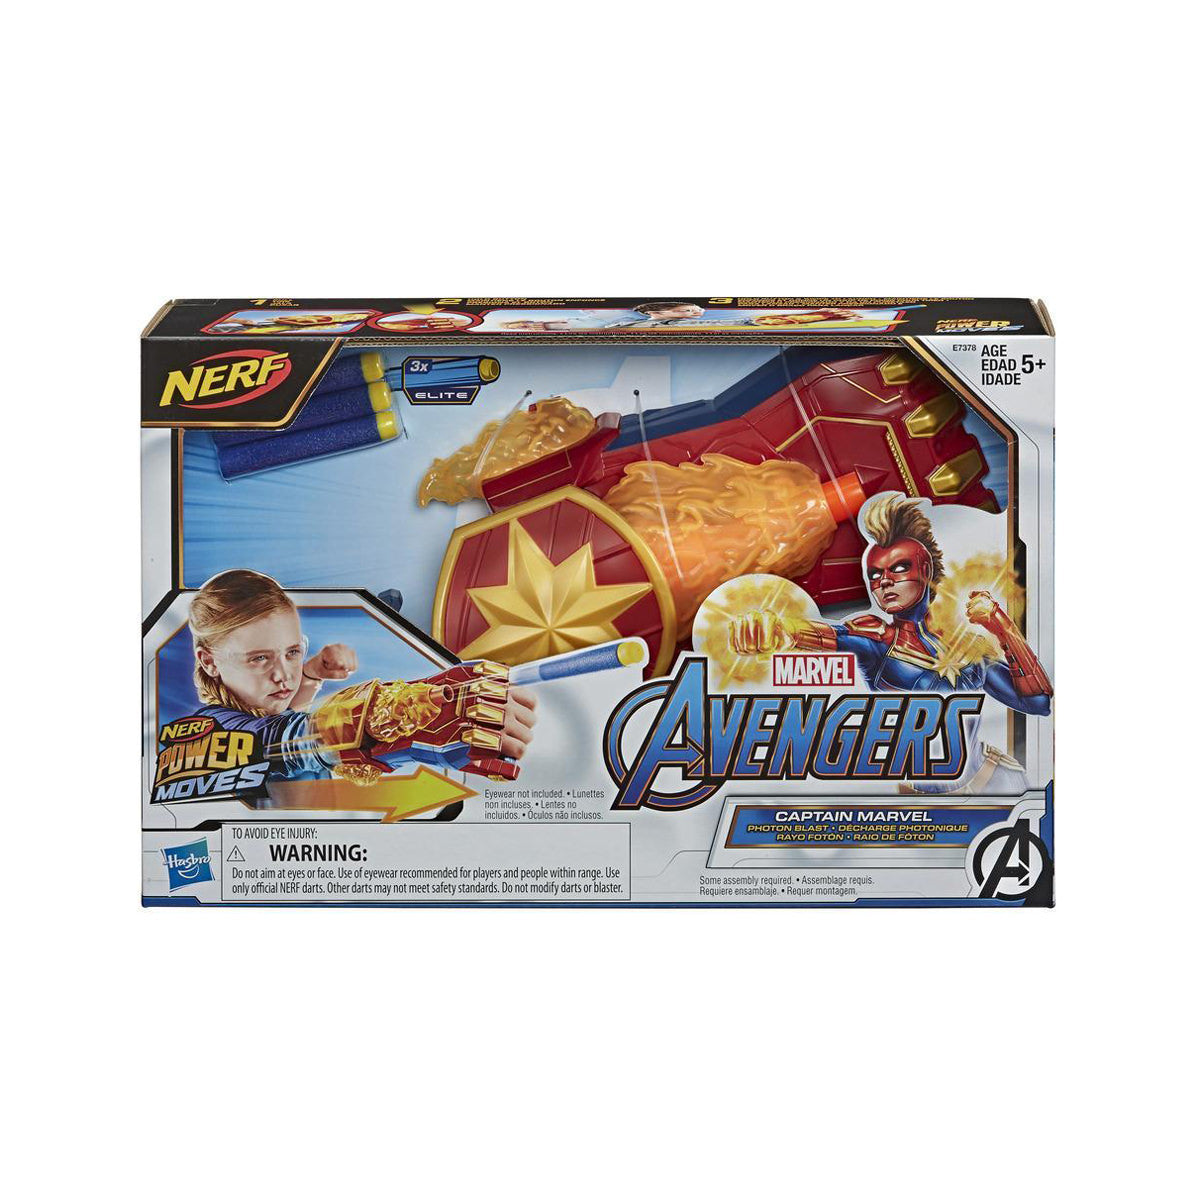 AVENGERS POWER MOVES ROLE PLAY CM